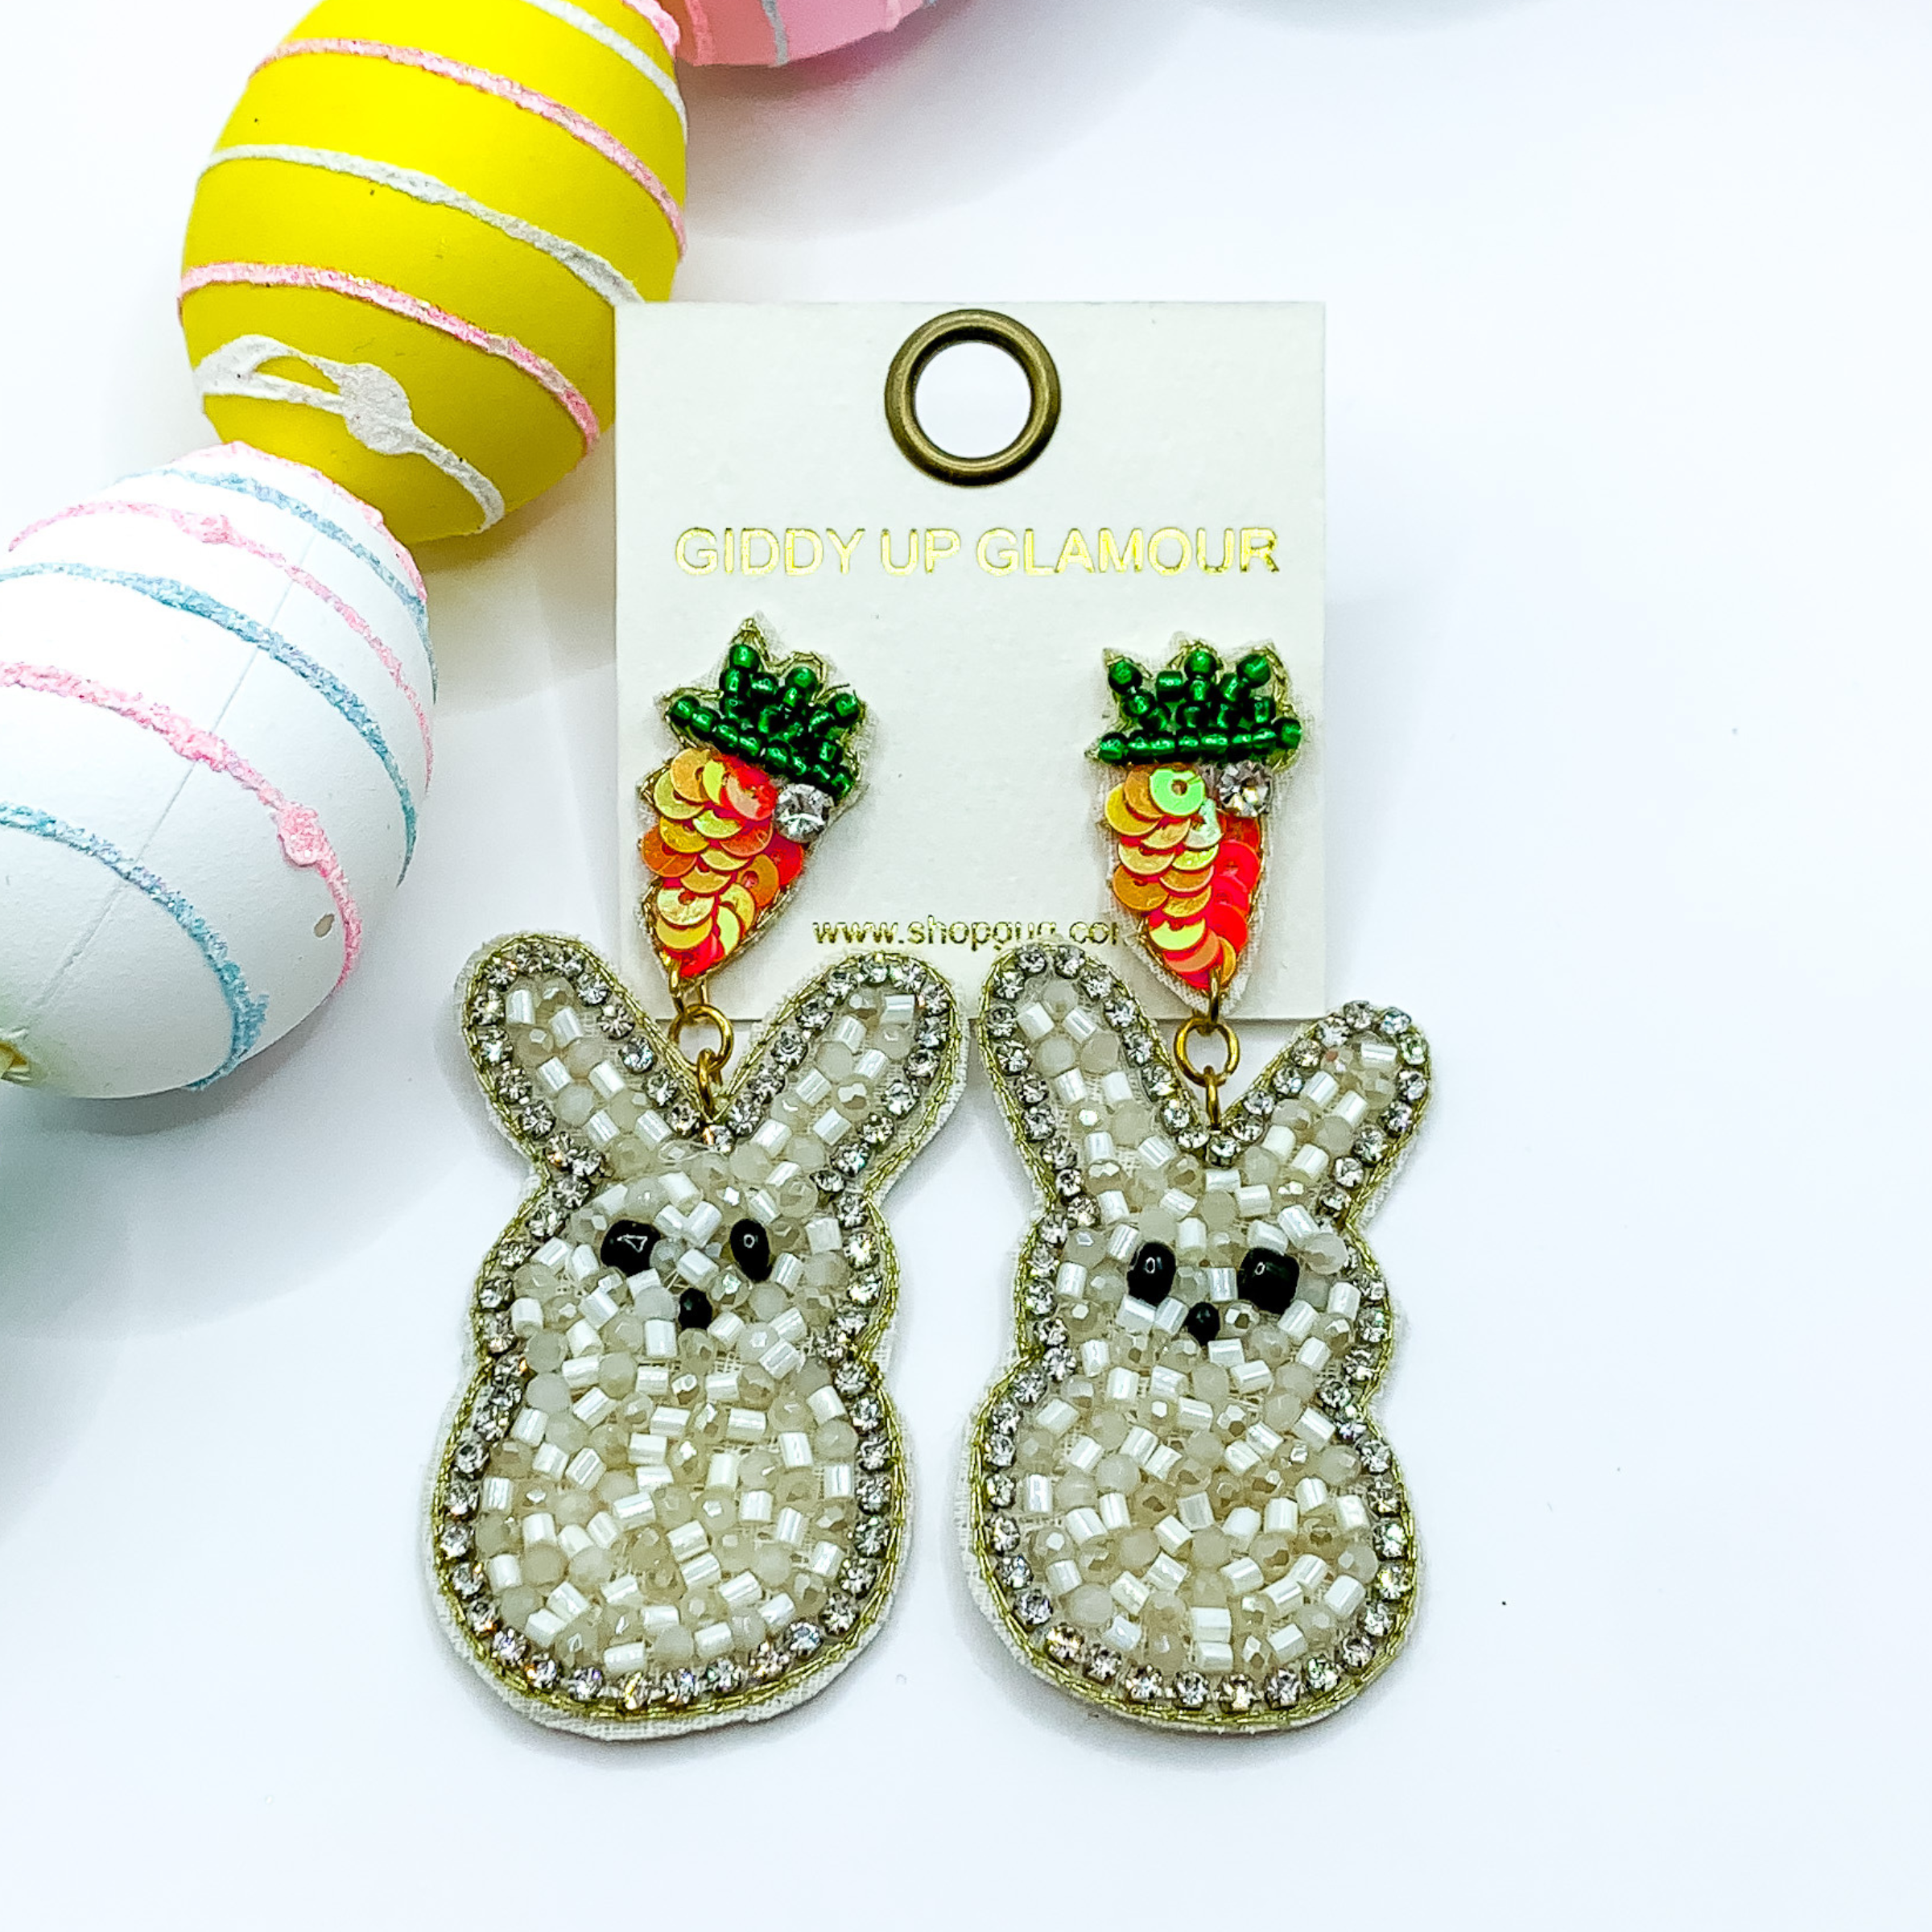 Beaded, ivory bunny rabbit earrings on a carrot post with a clear crystal outline. Pictured on white background with colorful Easter eggs.